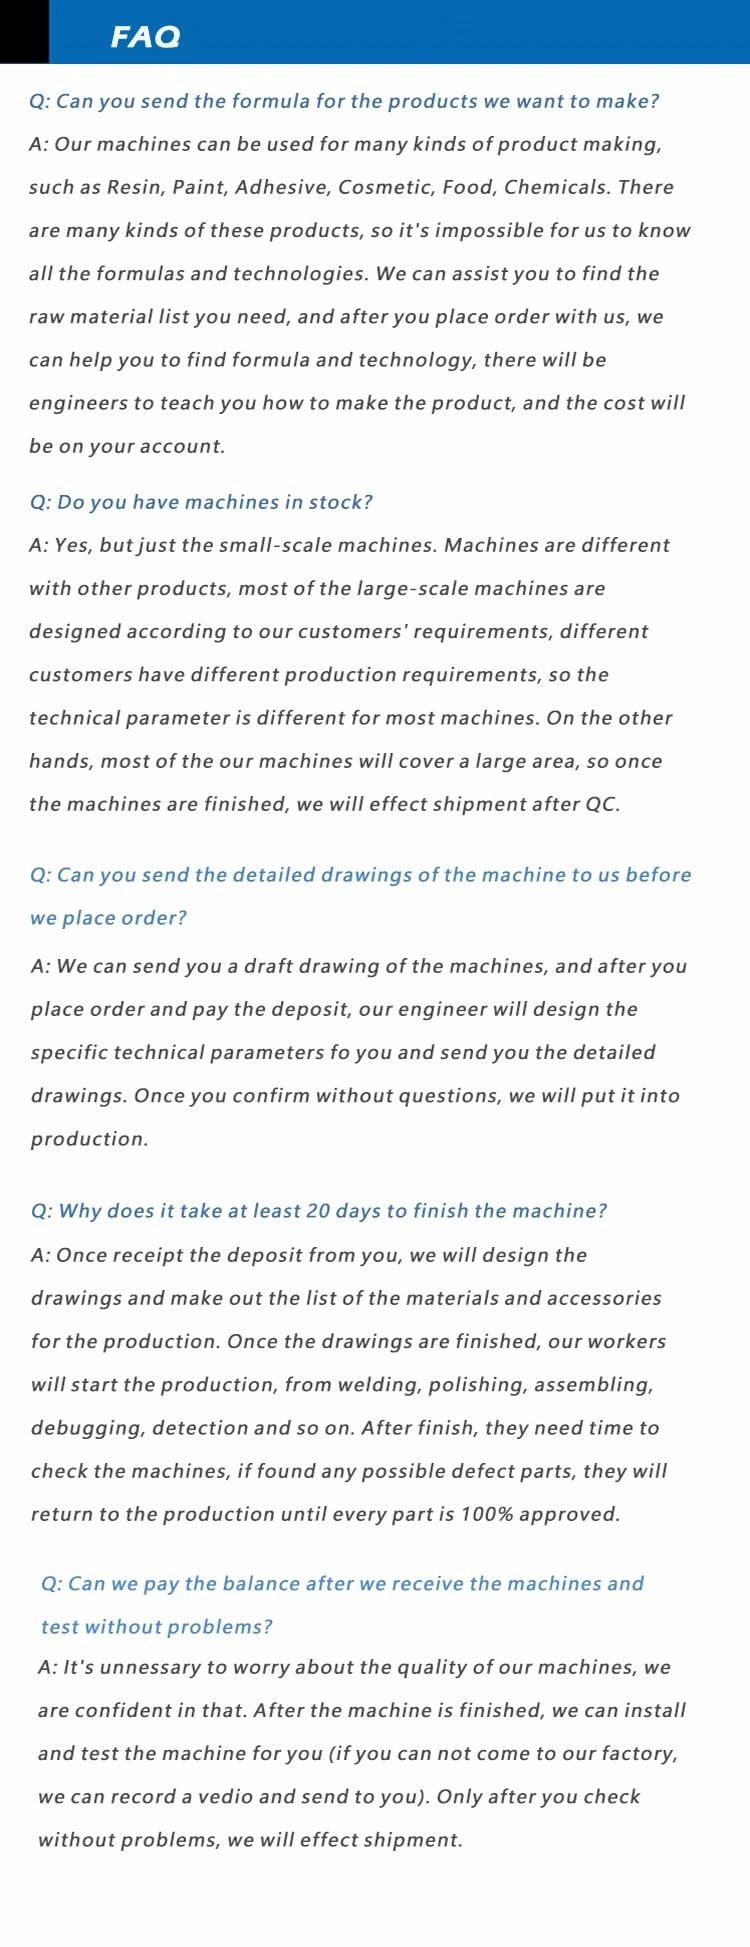 Electronic Silica Gel Butyl Glue Hot Melt Glue Mixing and Kneading Equipment Stainless Steel Mixing Machine